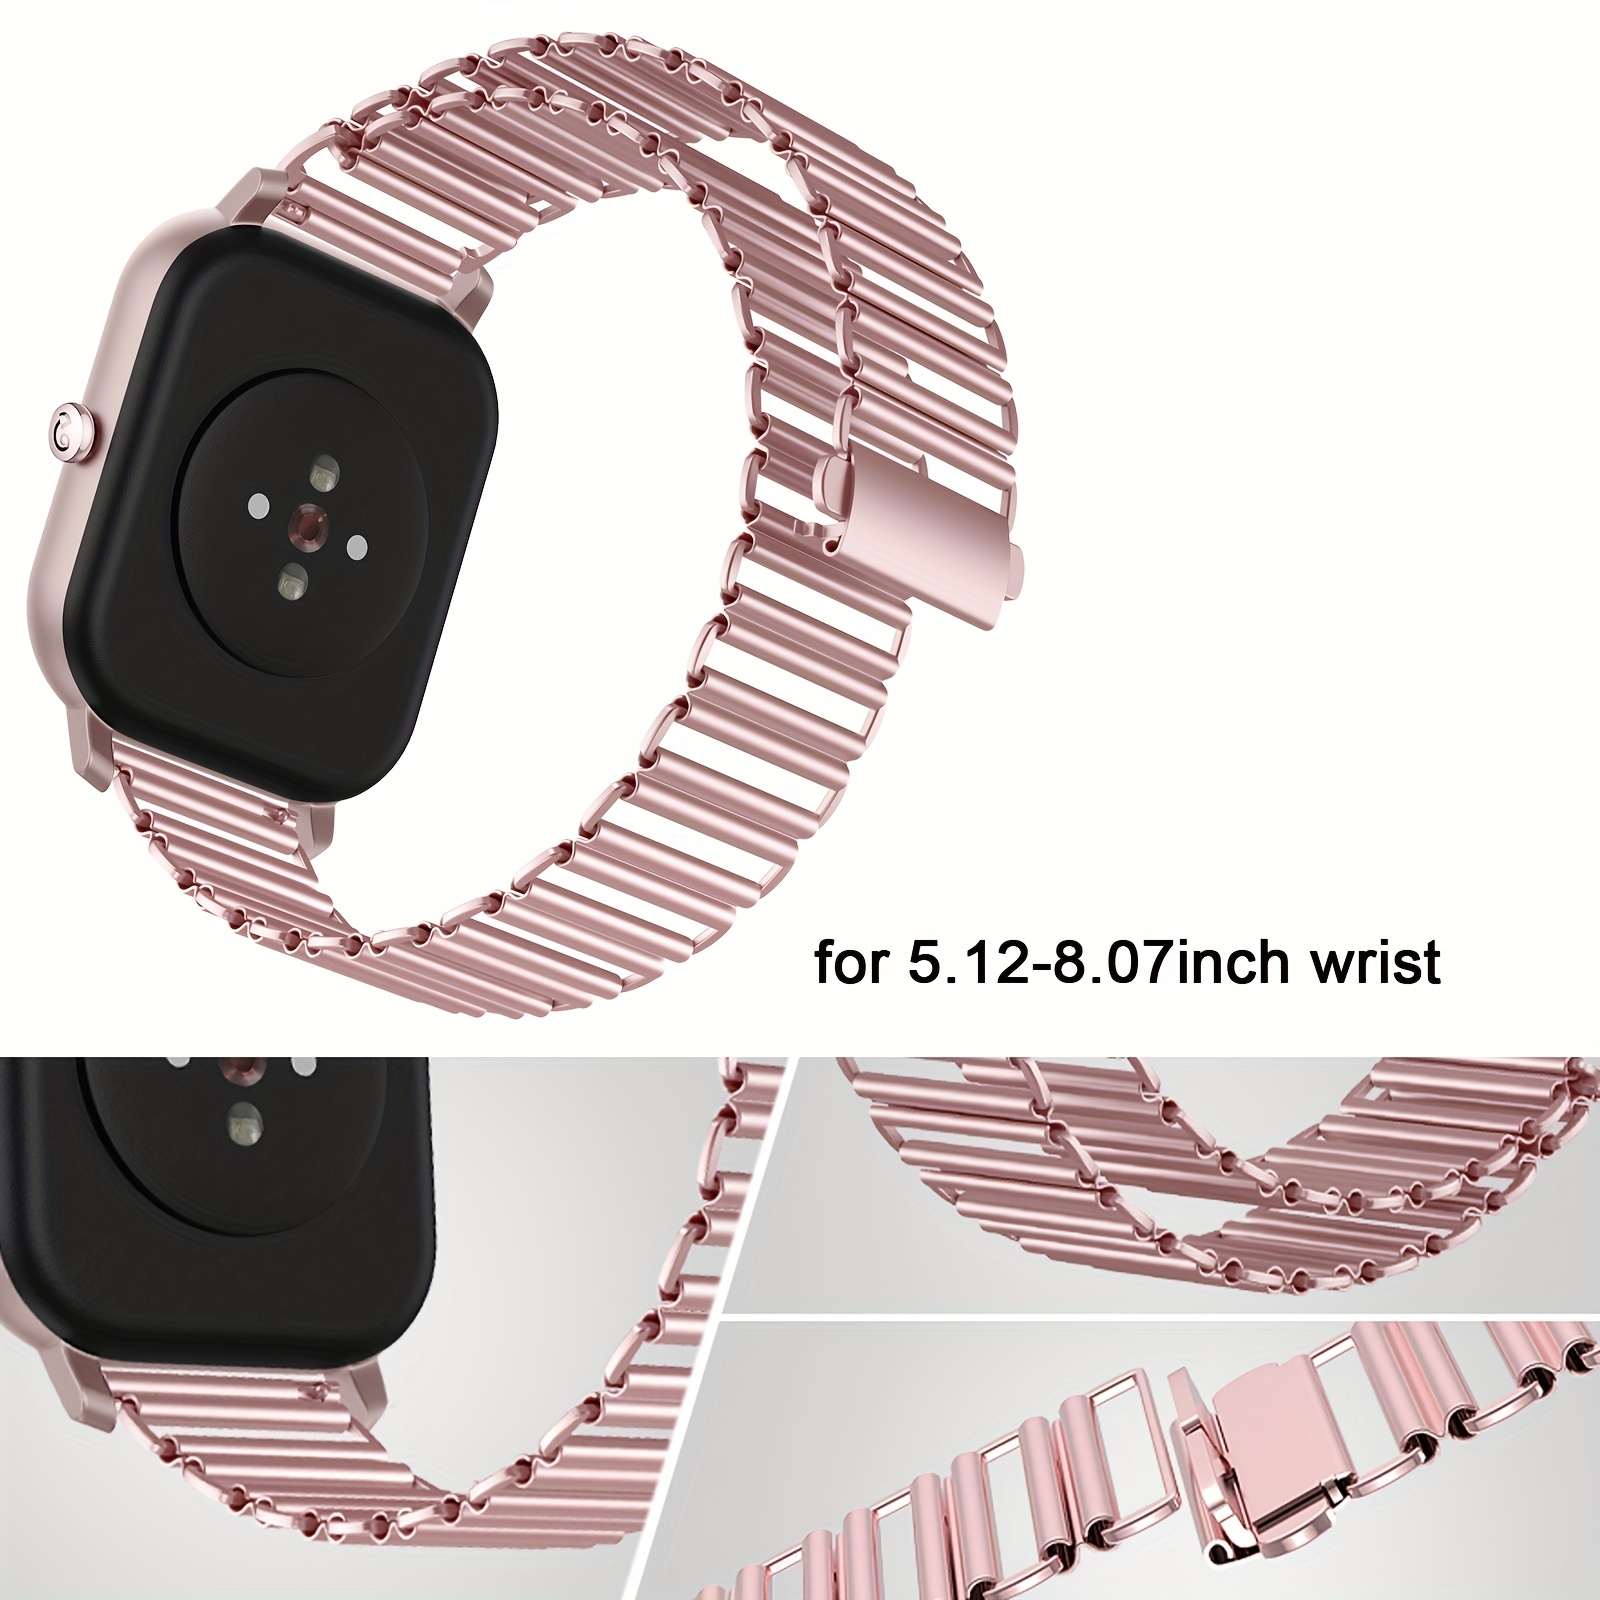 Temu 20mm Metal Watch Band Compatible with Amazfit GTS 4 Mini, Amazfit GTS 3/GTS 2 Mini/GTS, Replacement Strap for Amazfit GTS 2e/GTR 42mm/Bip/Bip S/Bip